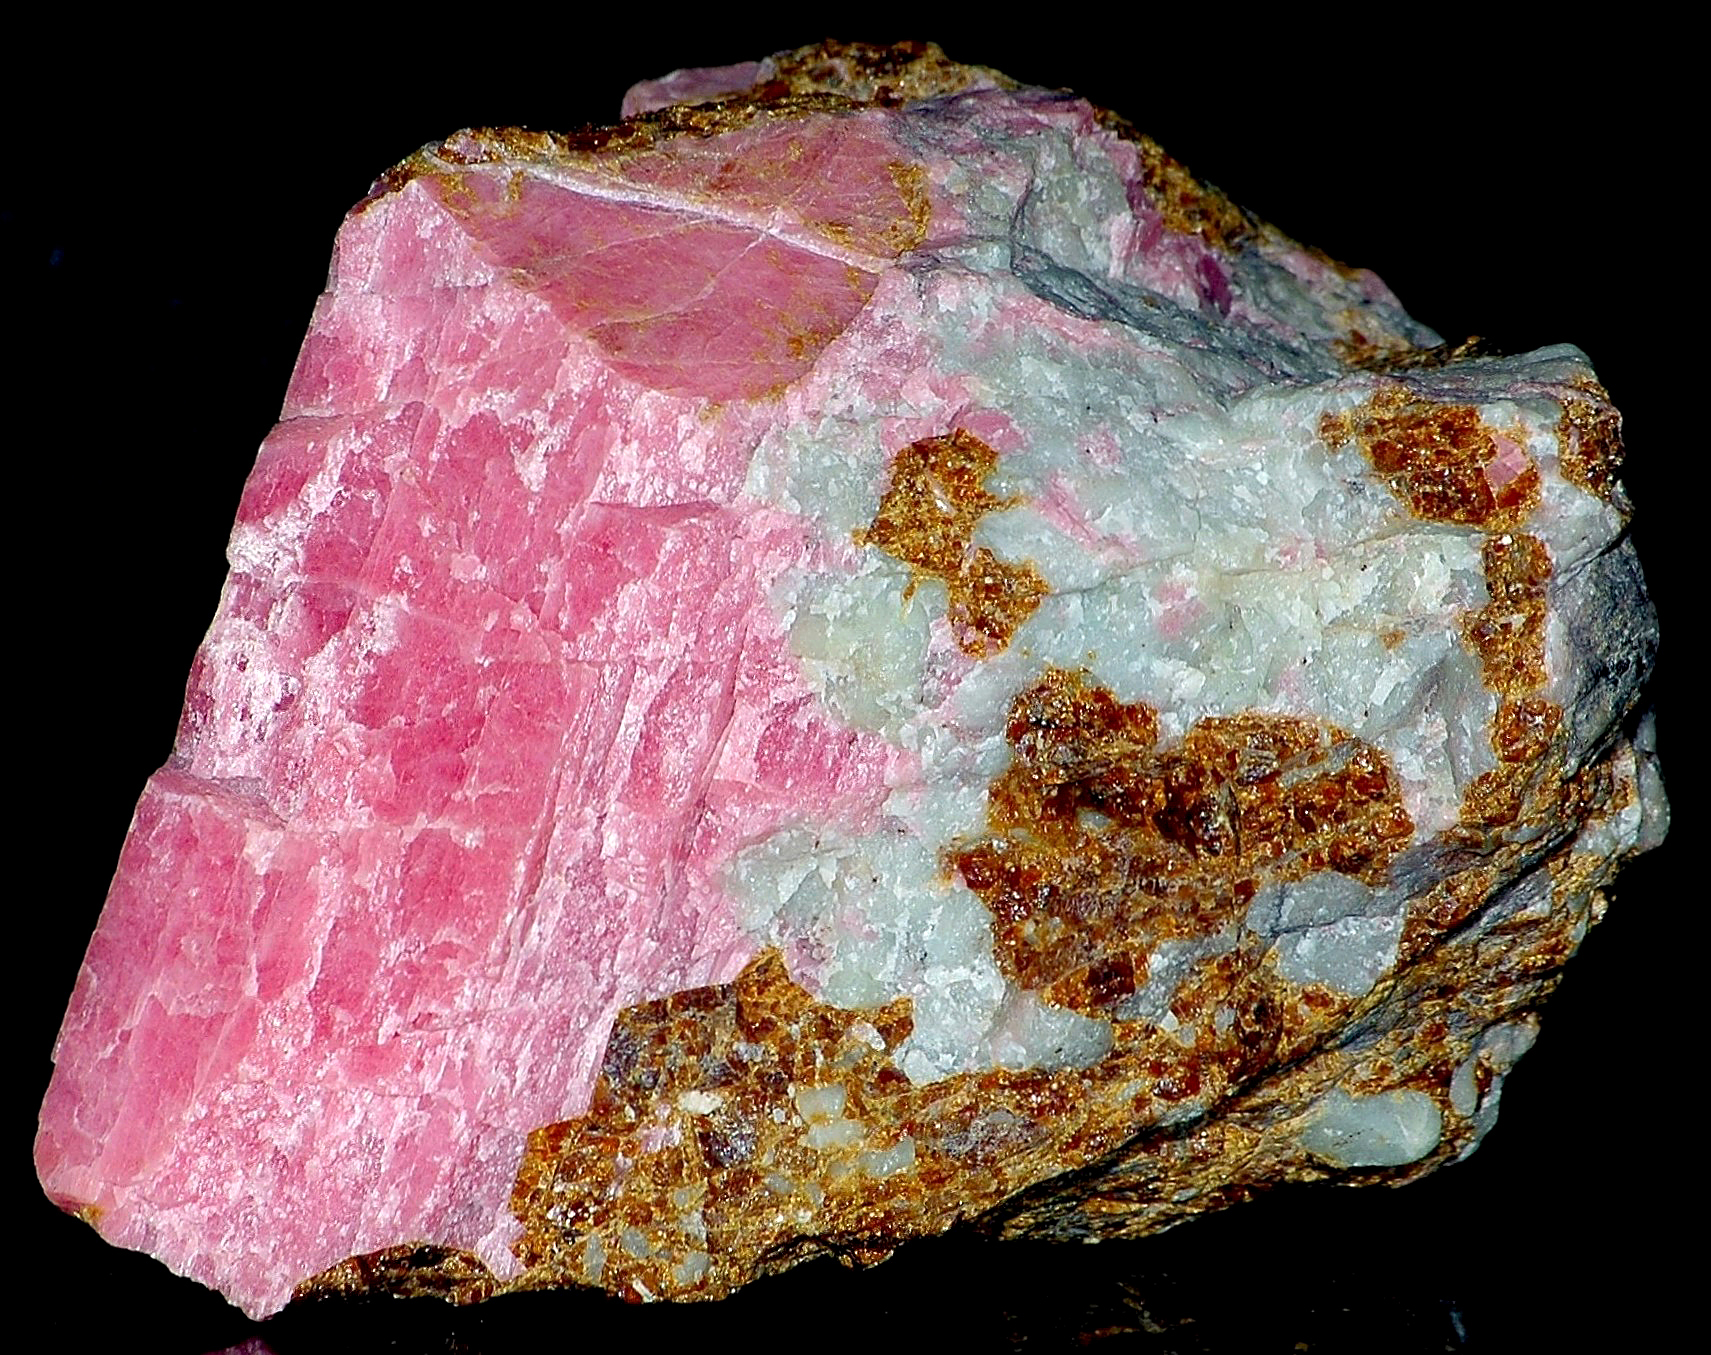 Rhodonite, willemite and andradite garnet from Franklin, NJ